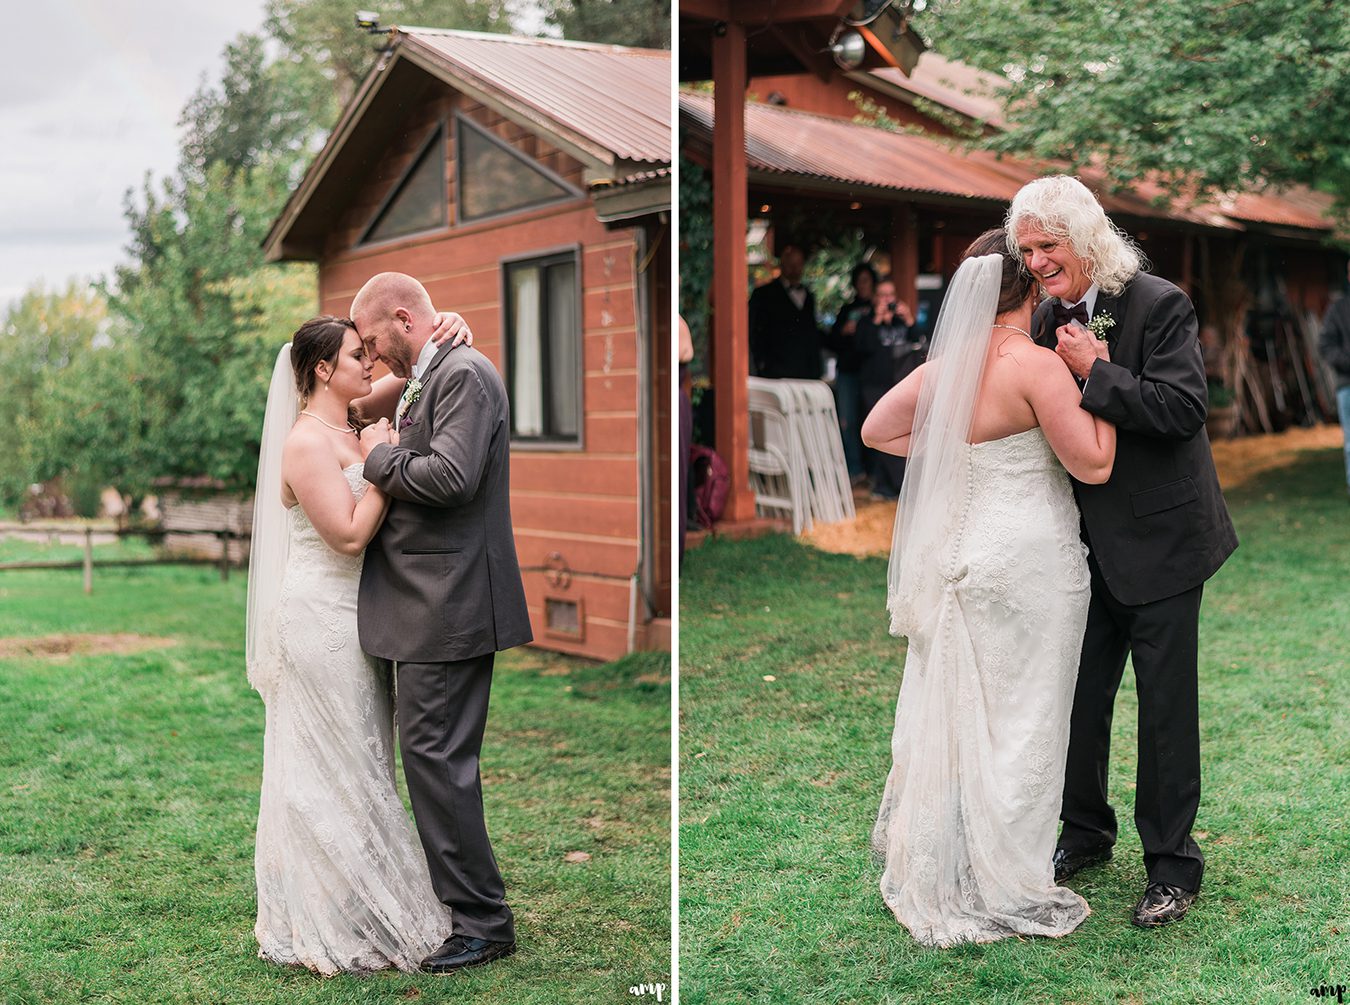 Bride and groom's first dance, father-daughter dance